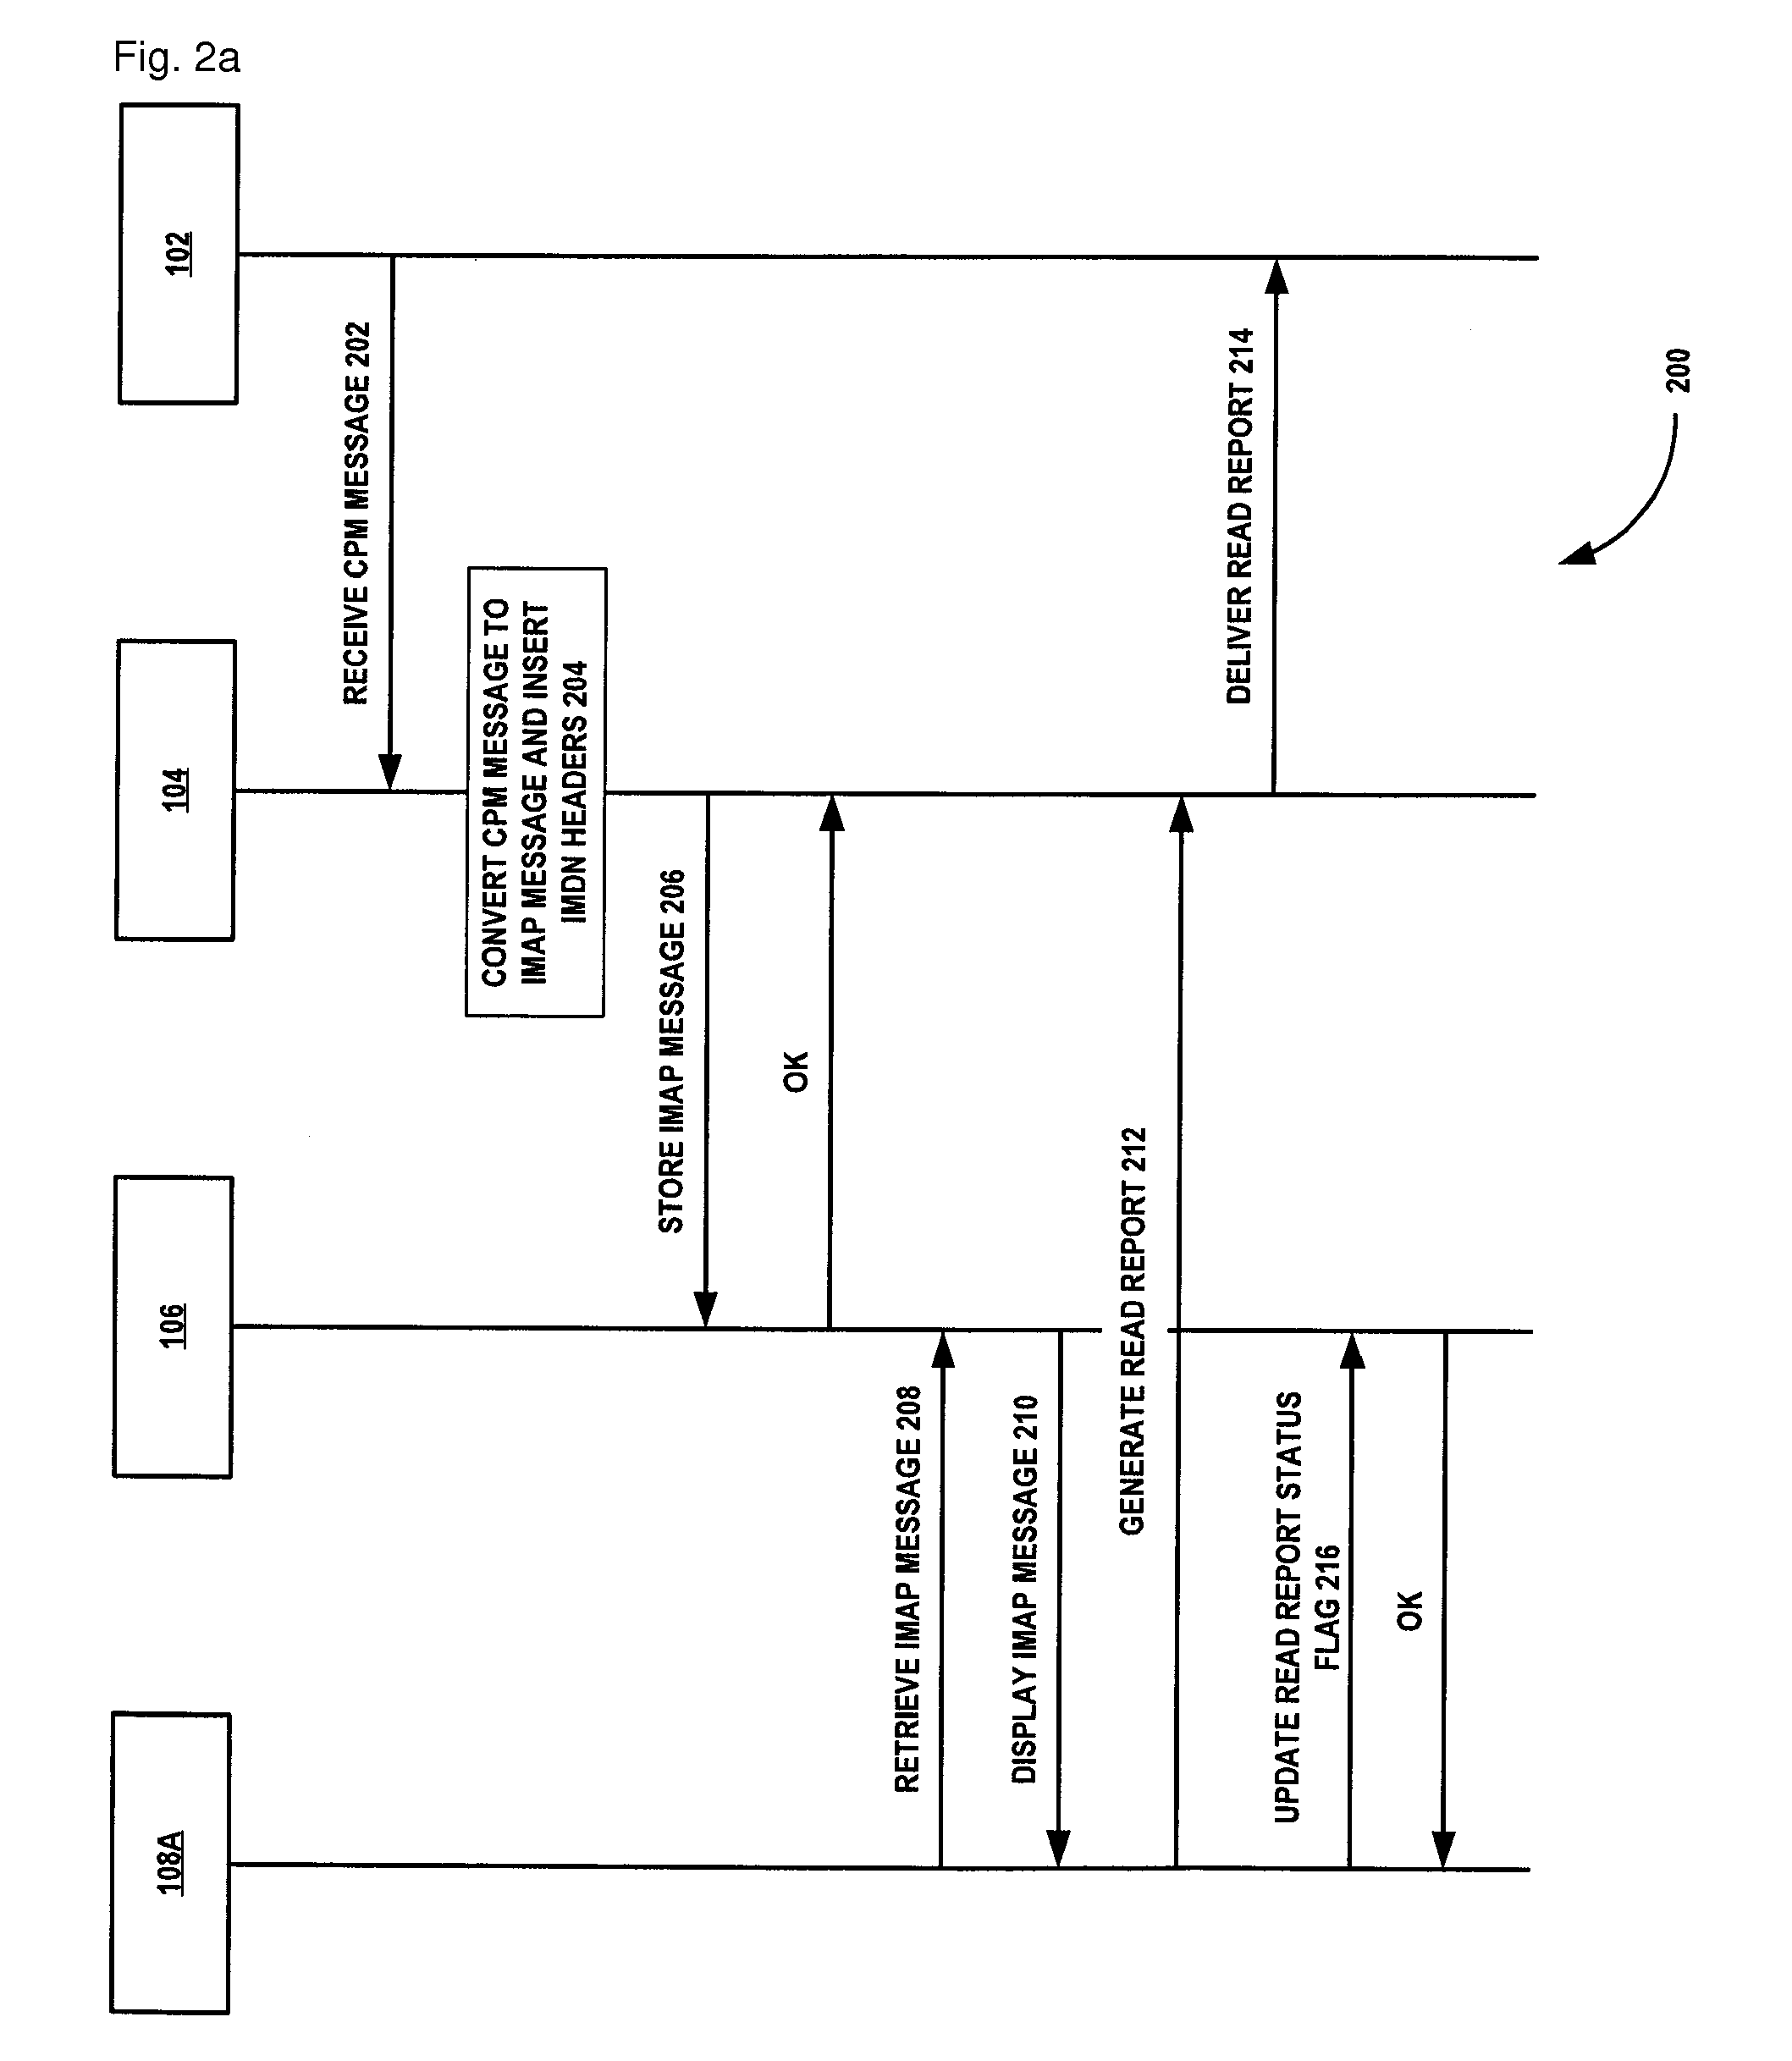 System and method of handling read and delivery confirmations for messages